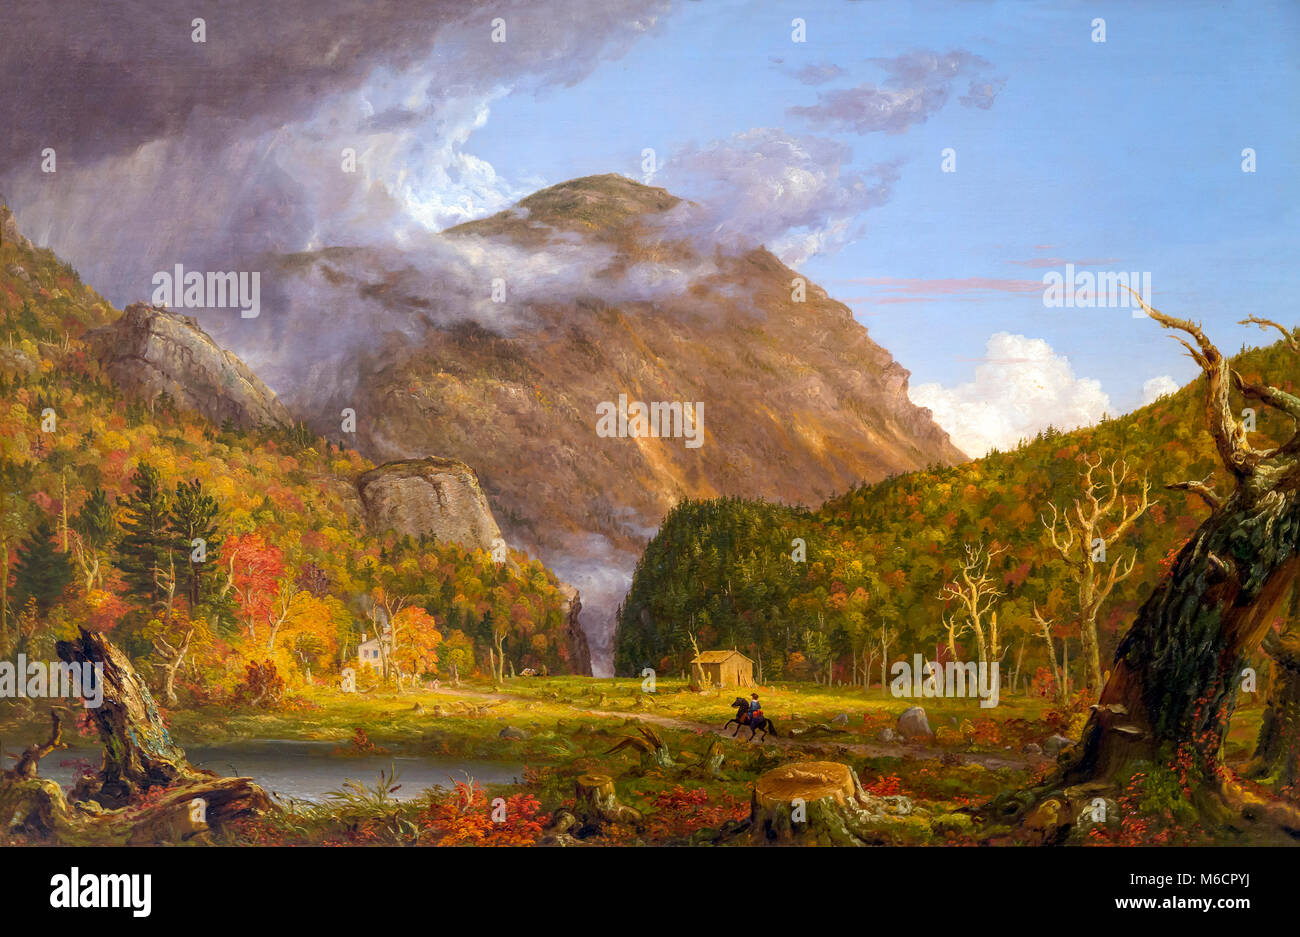 The Notch of the White Mountains, Crawford Notch, Thomas Cole, 1839, National Gallery of Art, Washington DC, USA, North America Stock Photo